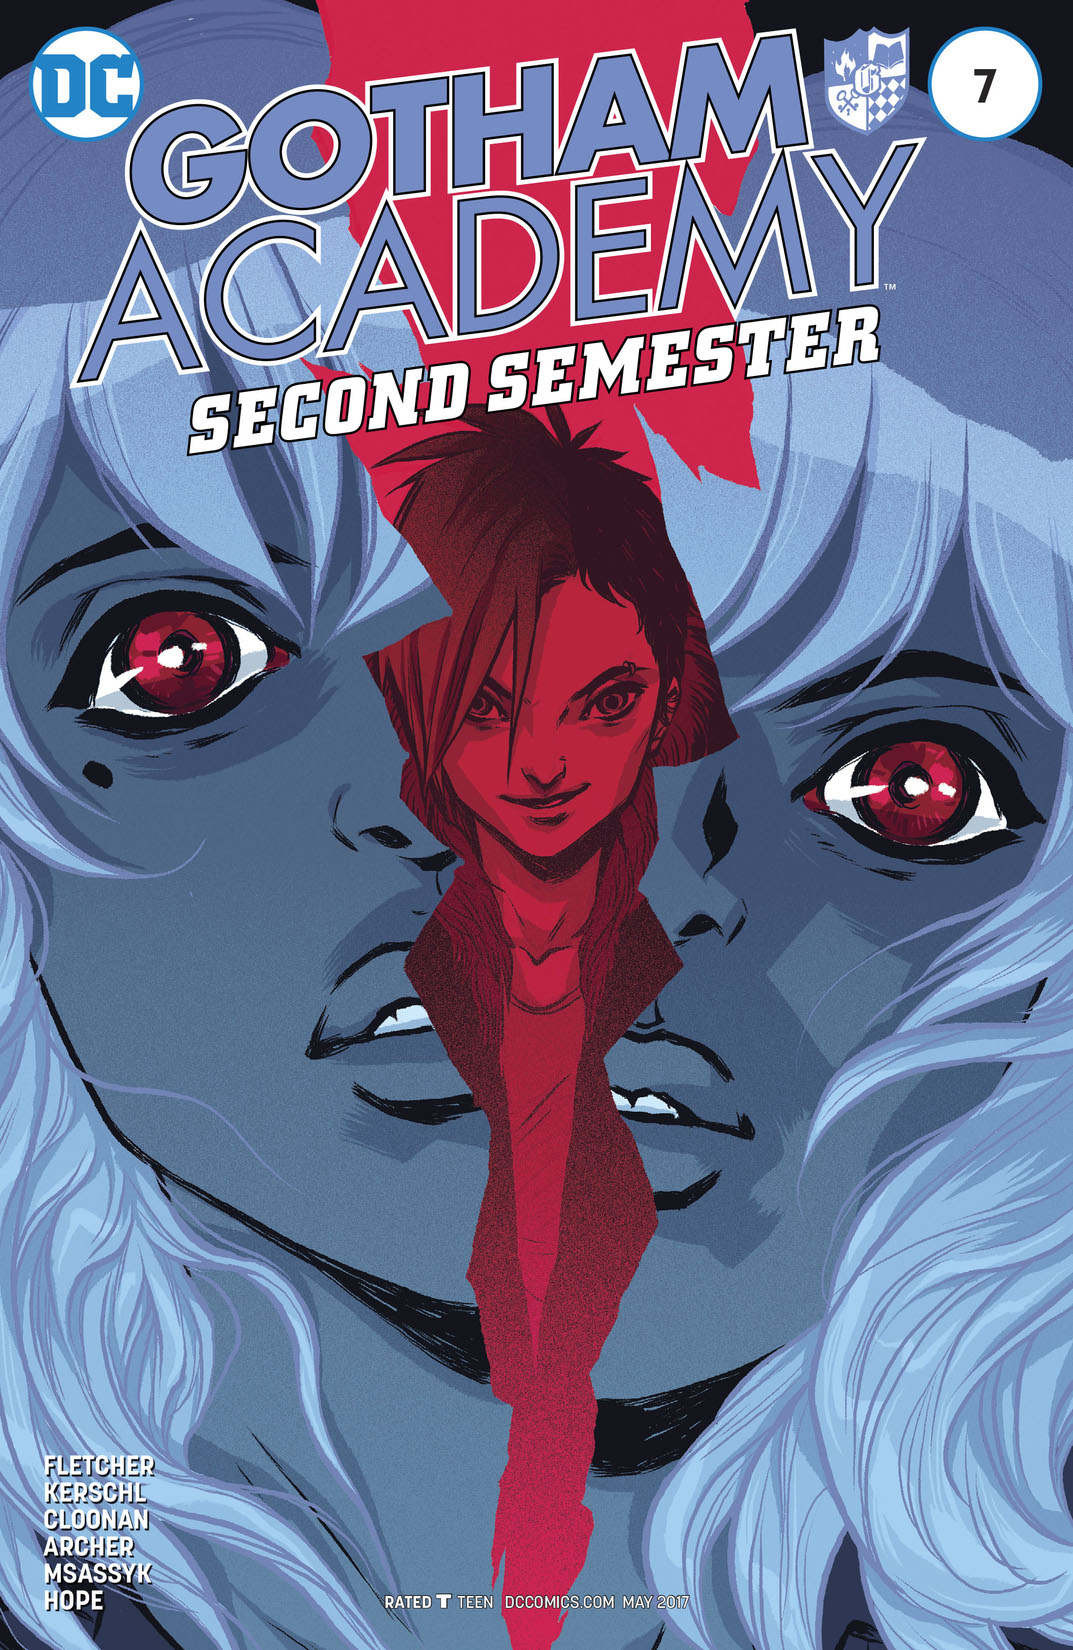 Gotham Academy: Second Semester #7 preview images